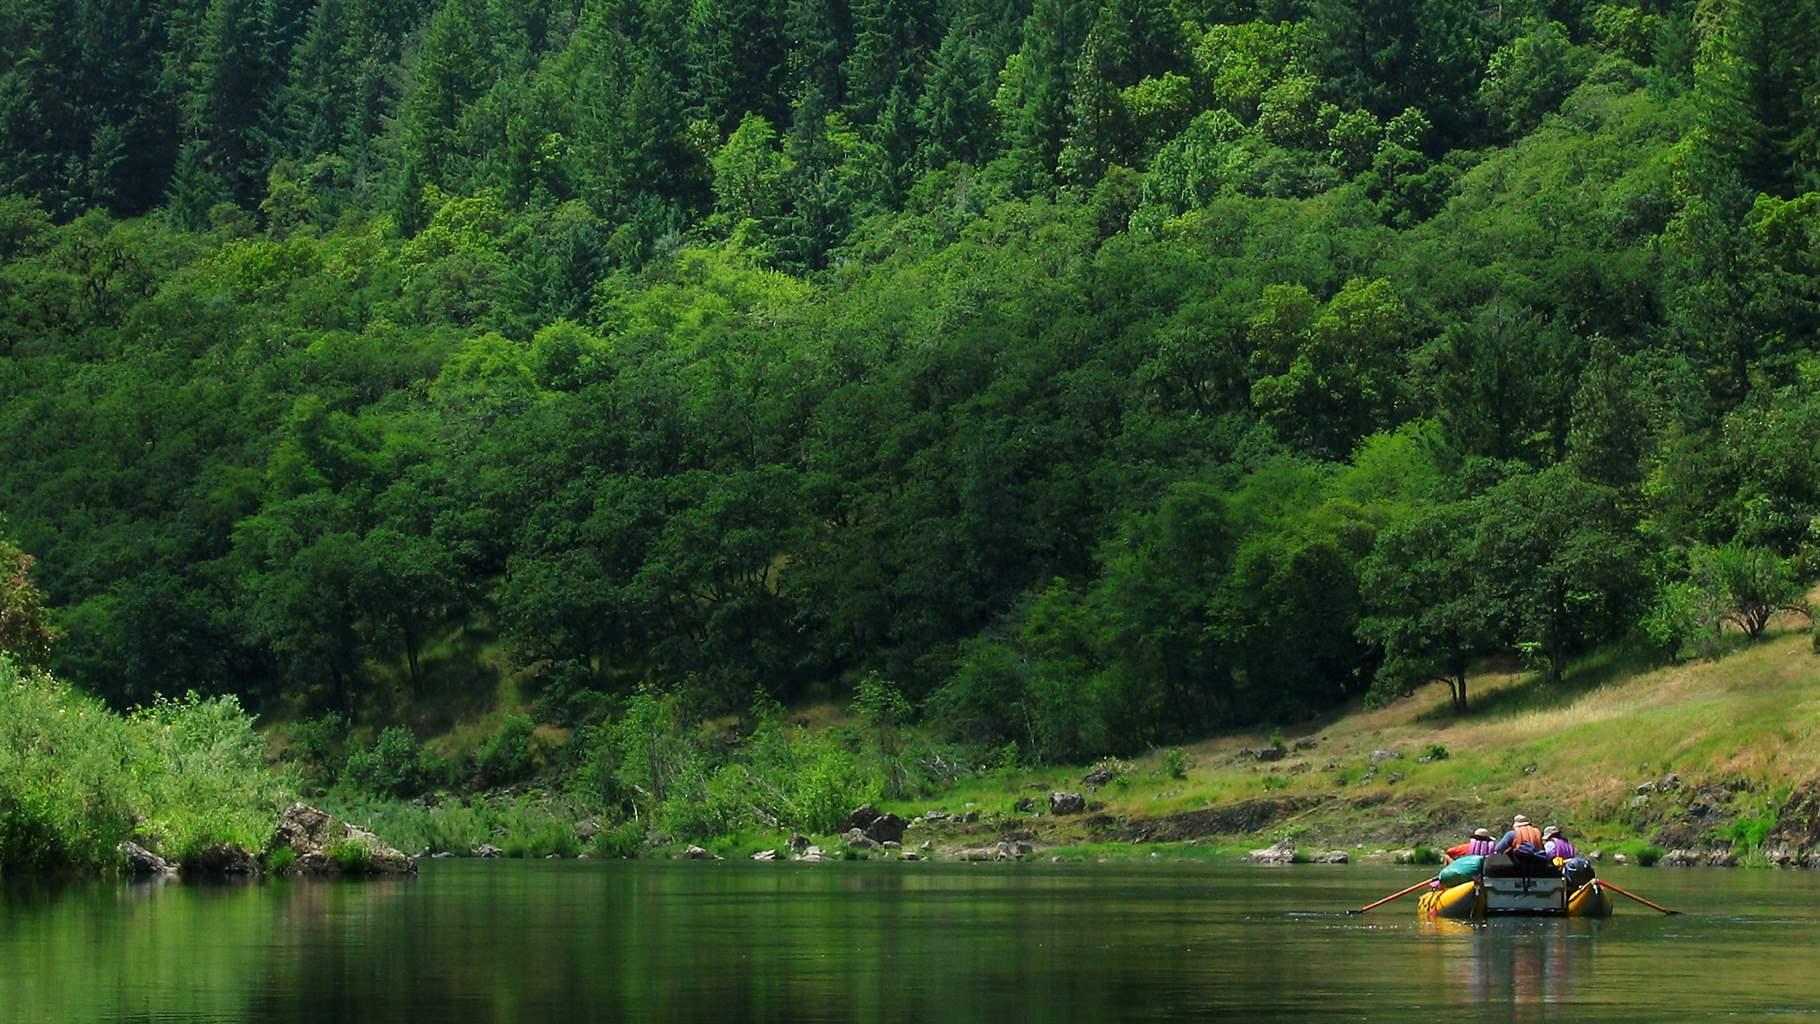 The Rogue River is popular with boaters and fishermen.